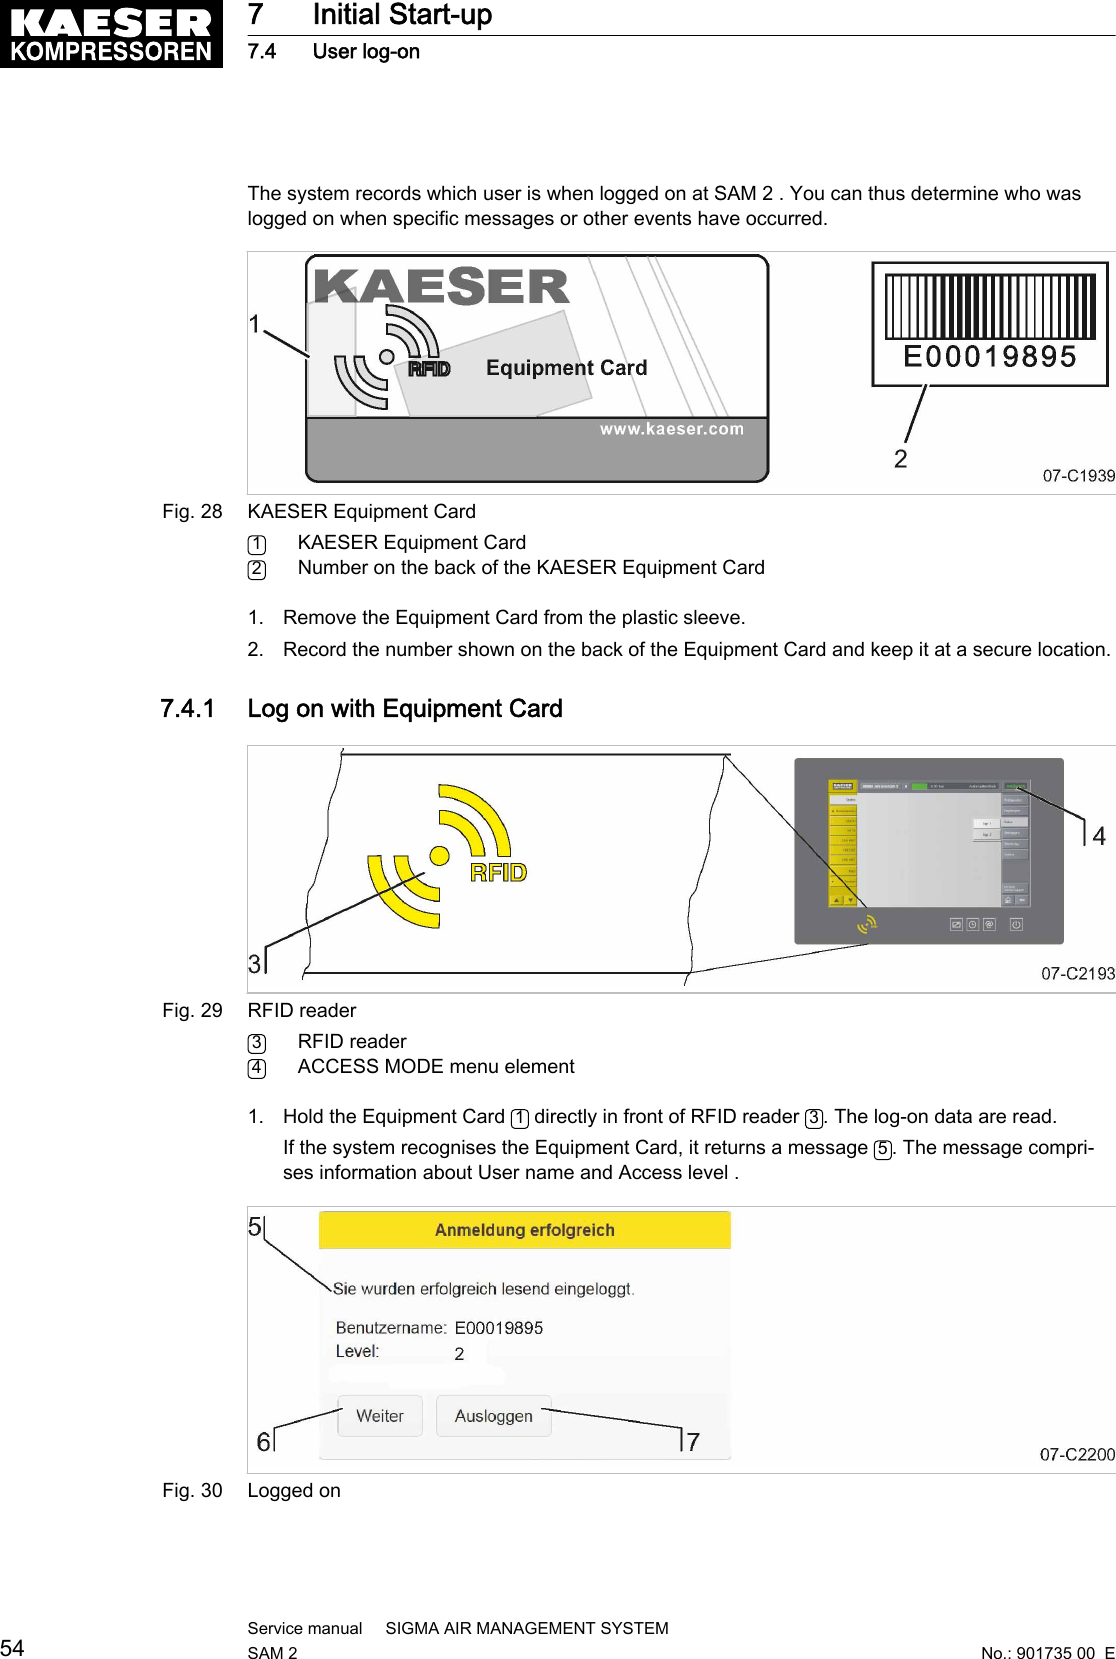 The system records which user is when logged on at SAM 2 . You can thus determine who waslogged on when specific messages or other events have occurred.Fig. 28 KAESER Equipment Card1KAESER Equipment Card2Number on the back of the KAESER Equipment Card1. Remove the Equipment Card from the plastic sleeve.2. Record the number shown on the back of the Equipment Card and keep it at a secure location.7.4.1  Log on with Equipment CardFig. 29 RFID reader3RFID reader4ACCESS MODE menu element1. Hold the Equipment Card  1 directly in front of RFID reader  3. The log-on data are read.If the system recognises the Equipment Card, it returns a message  5. The message compri‐ses information about User name and Access level .Fig. 30 Logged on7 Initial Start-up7.4 User log-on54Service manual     SIGMA AIR MANAGEMENT SYSTEMSAM 2  No.: 901735 00  E